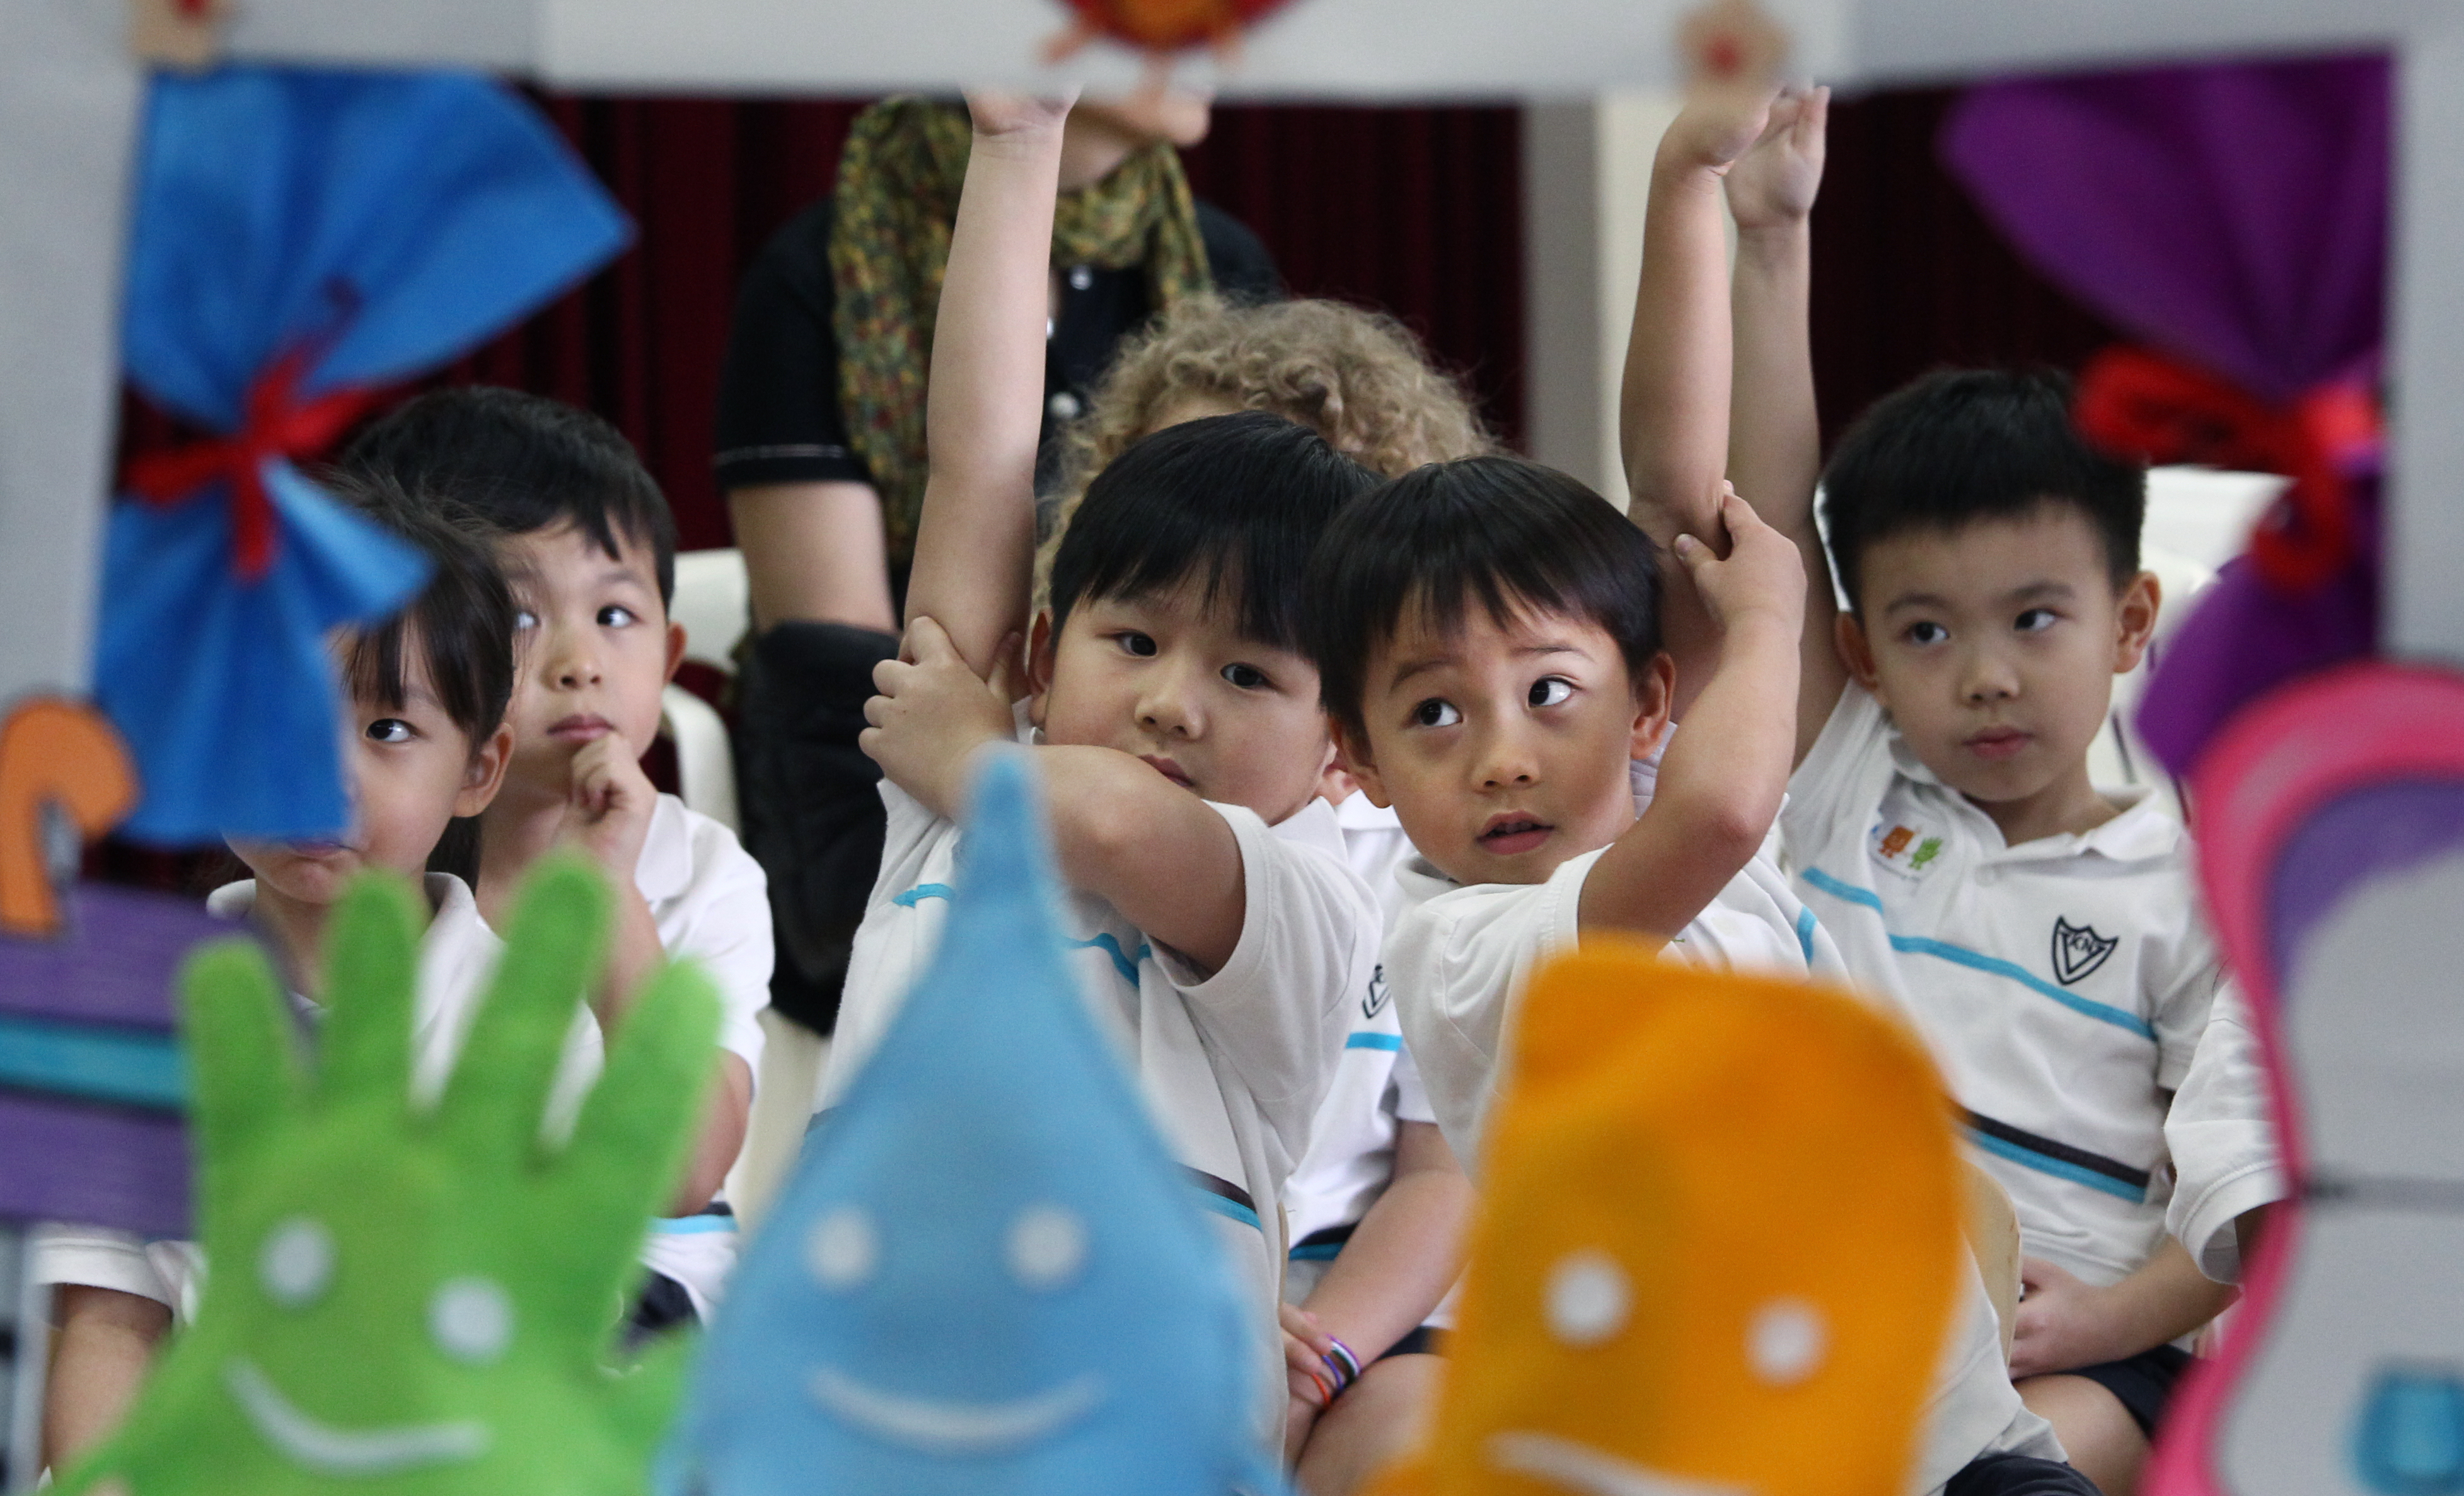 With fully fledged status, kindergartens could attract more qualified teachers and better informed instruction. Photo: May Tse